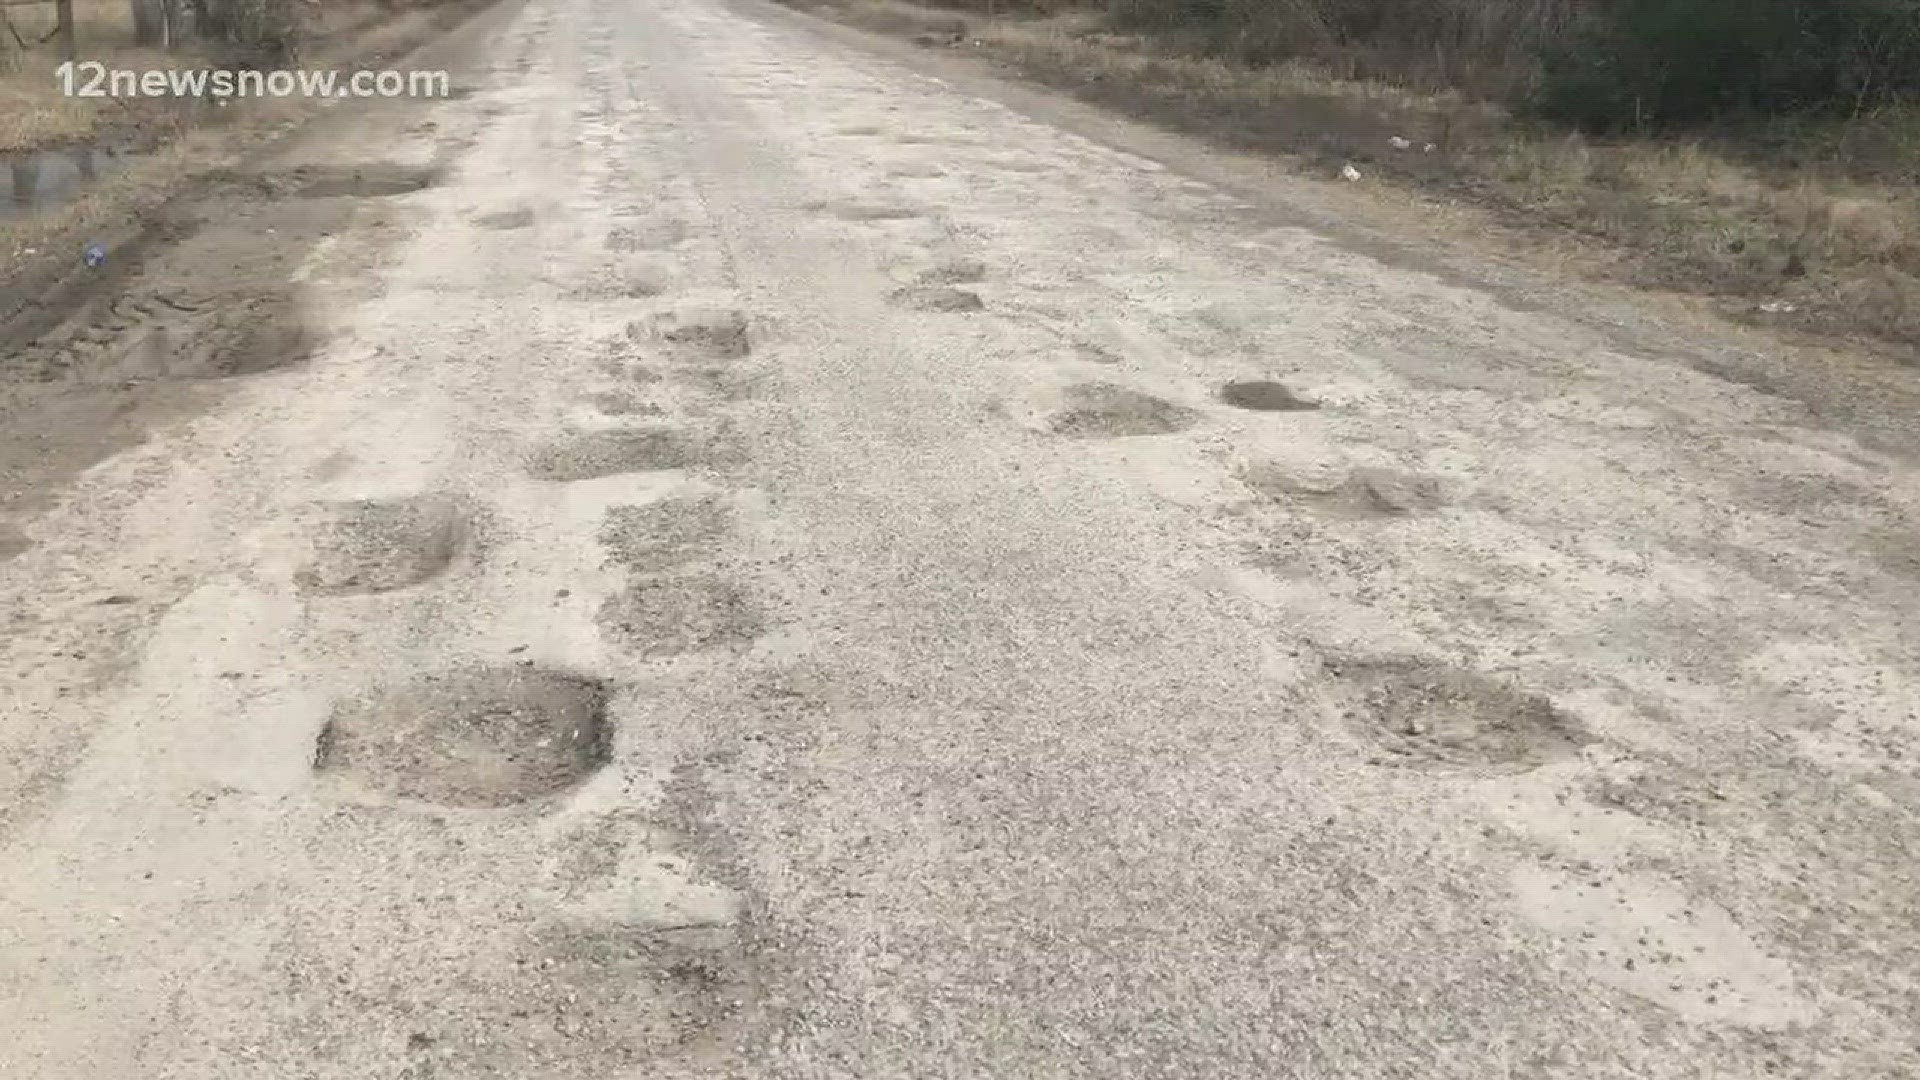 Residents living on Dempsey Drive have been battling the pothole problem for 4 months. Orange mayor, Jimmy Sims, says the city is waiting for funding to fix these issues.